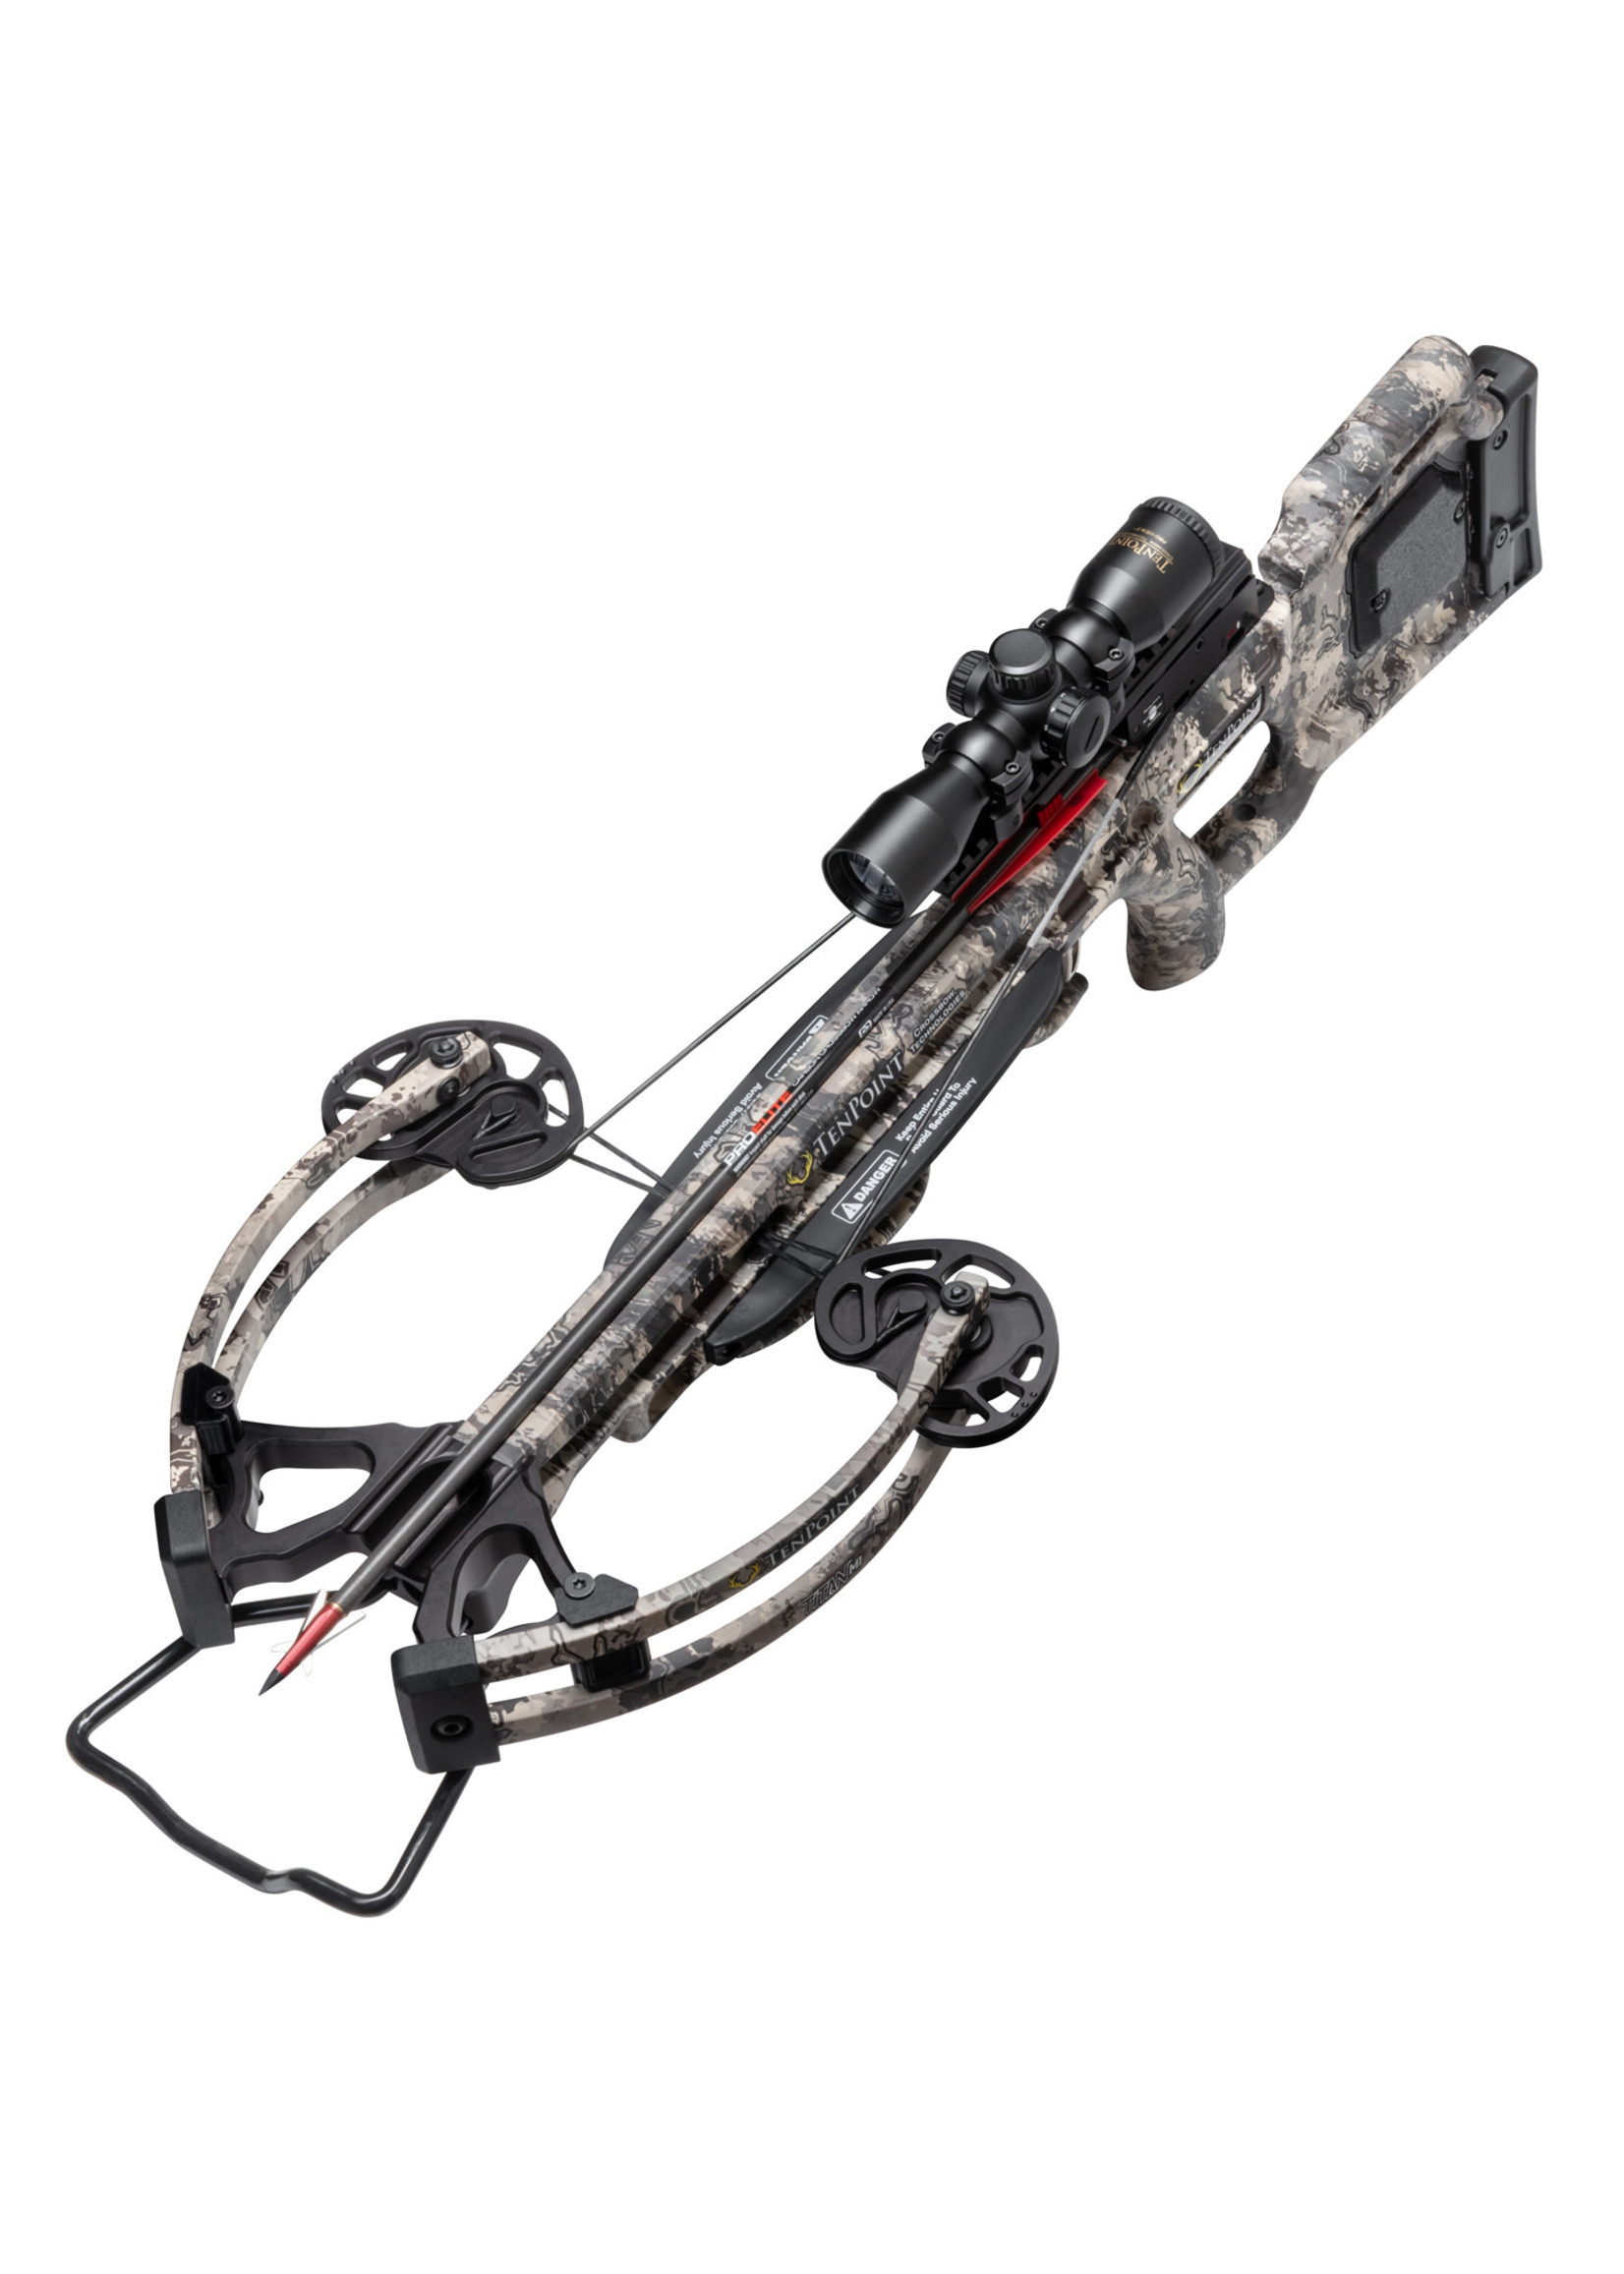 Tenpoint Titan m1 crossbow rope sled